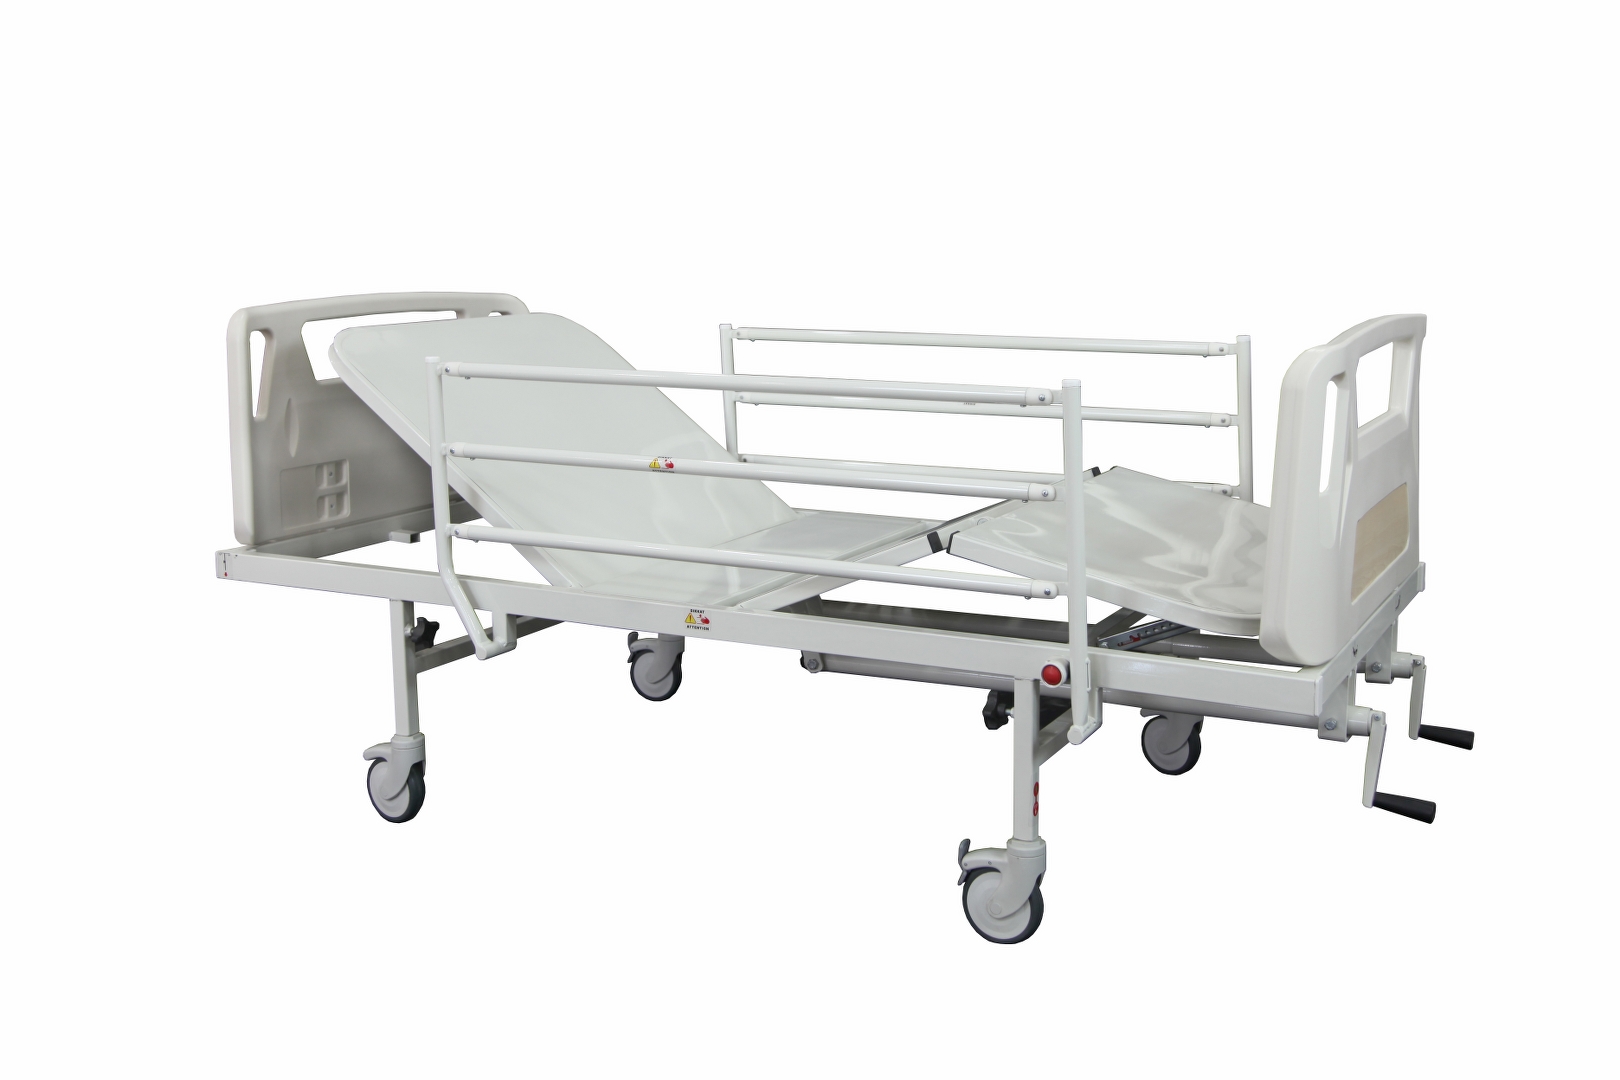 HKM-CC20 MECHANICAL HOSPITAL BED WITH 2 ADJUSTMENT-Detail-1